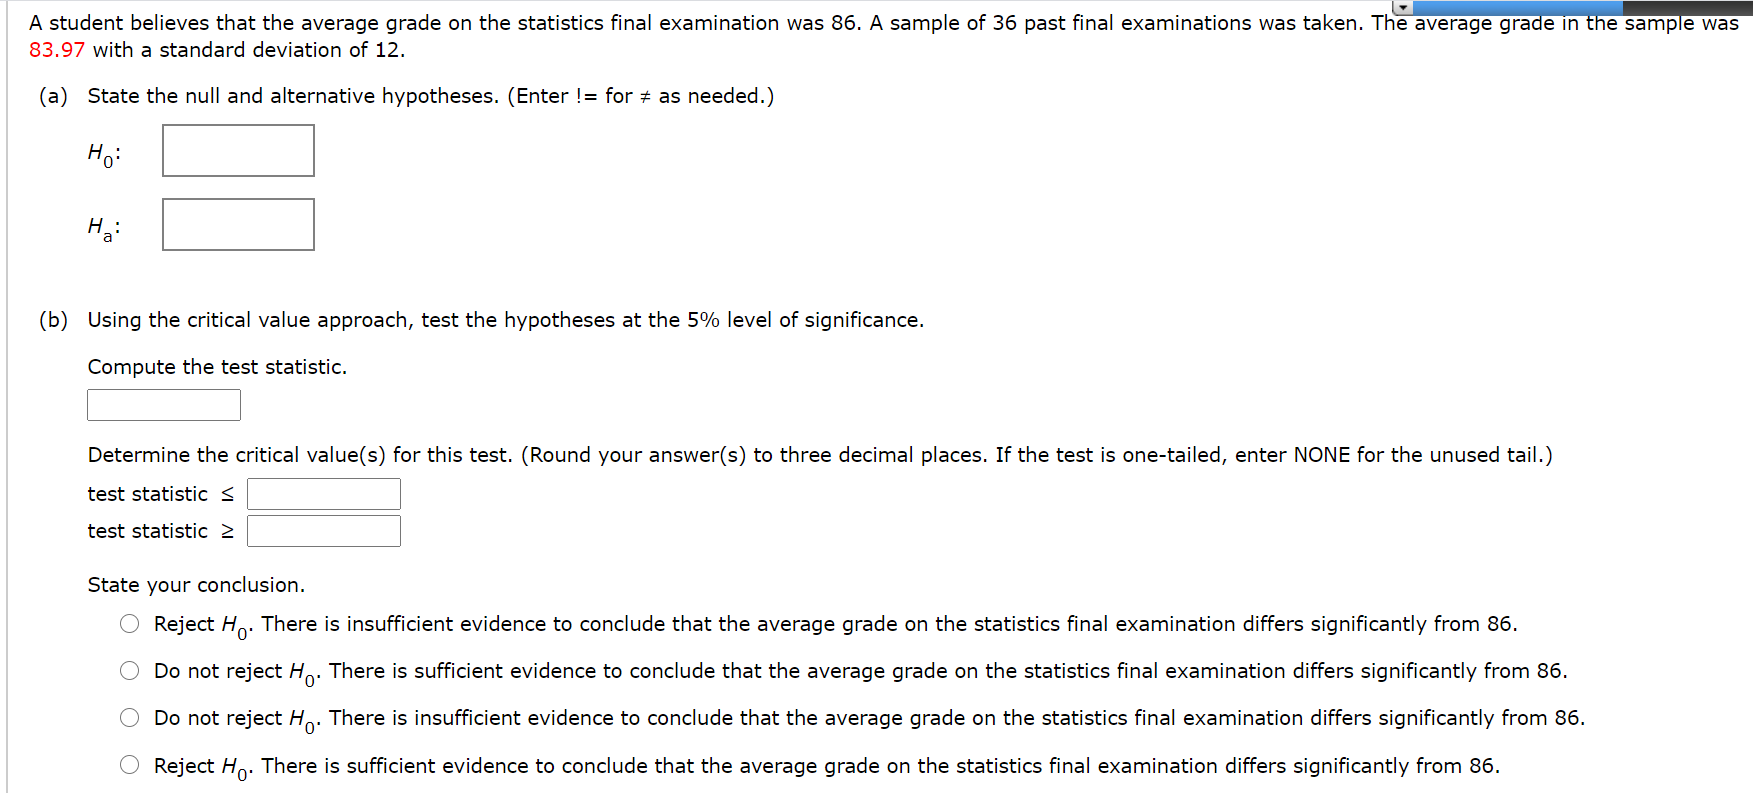 A student believes that the average grade on the statistics final examination was 86. A sample of 36 past final examinations was taken. The average grade in the sample was
83.97 with a standard deviation of 12.
